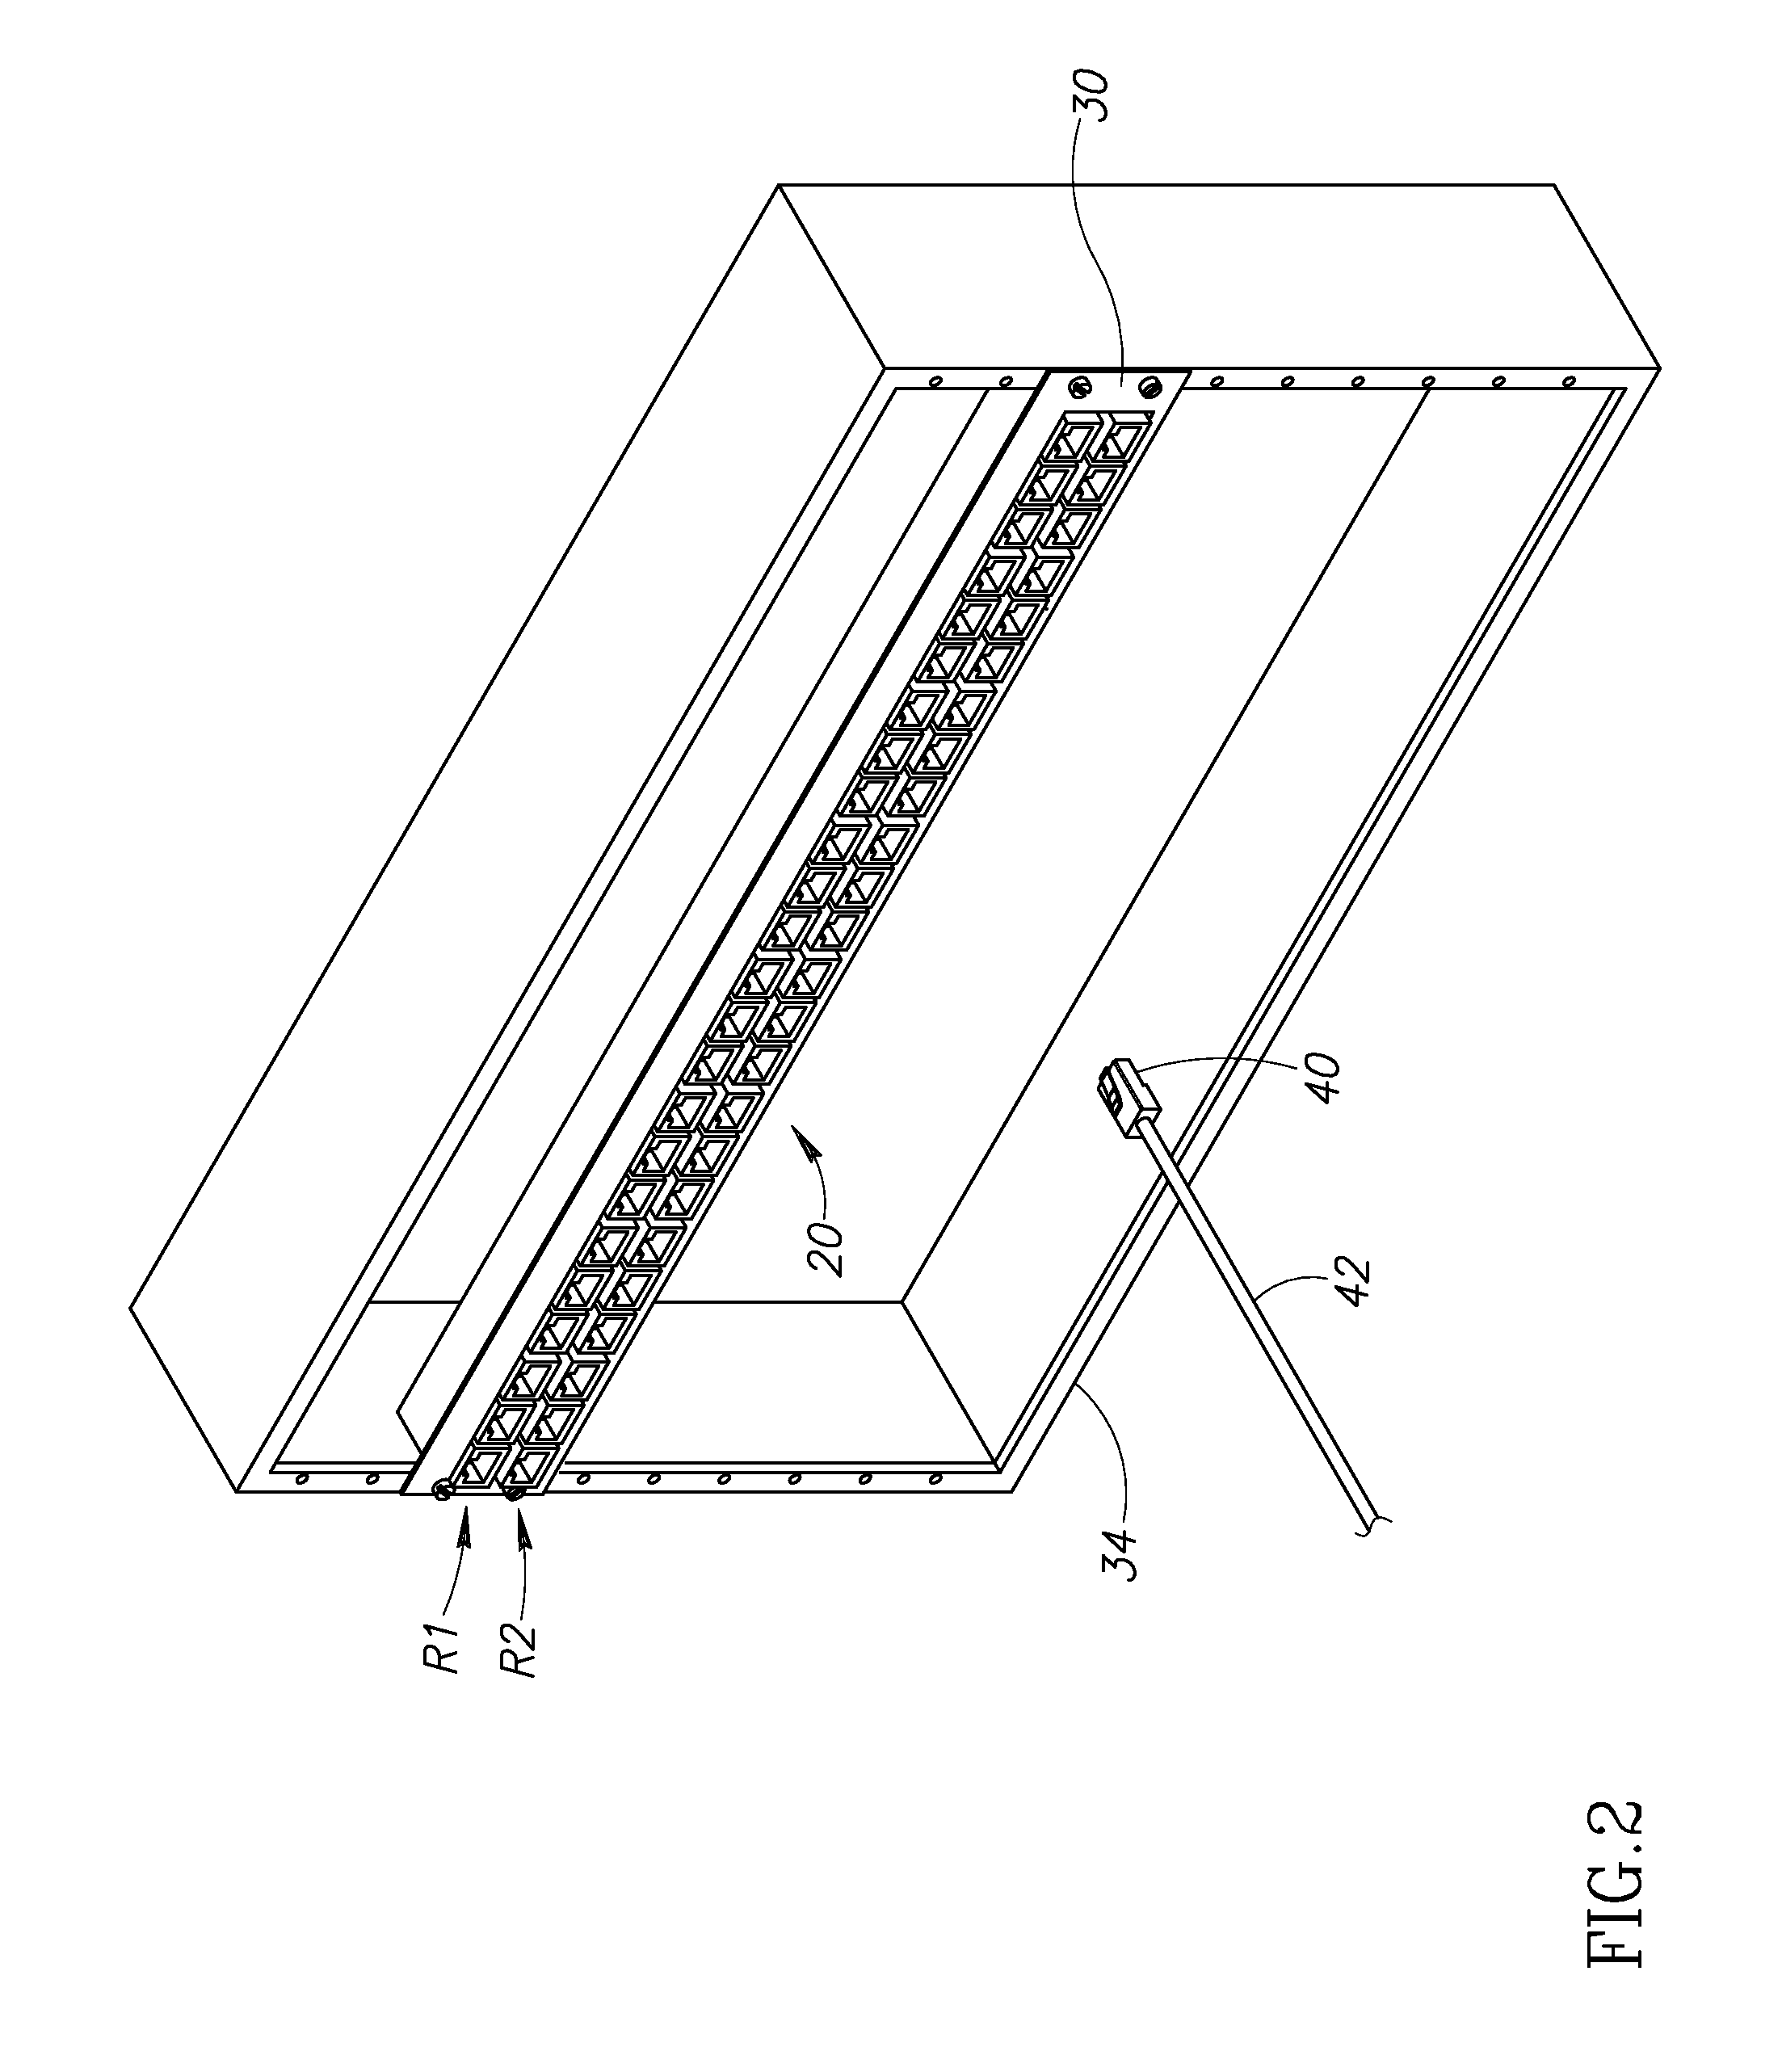 High density high speed data communications connector